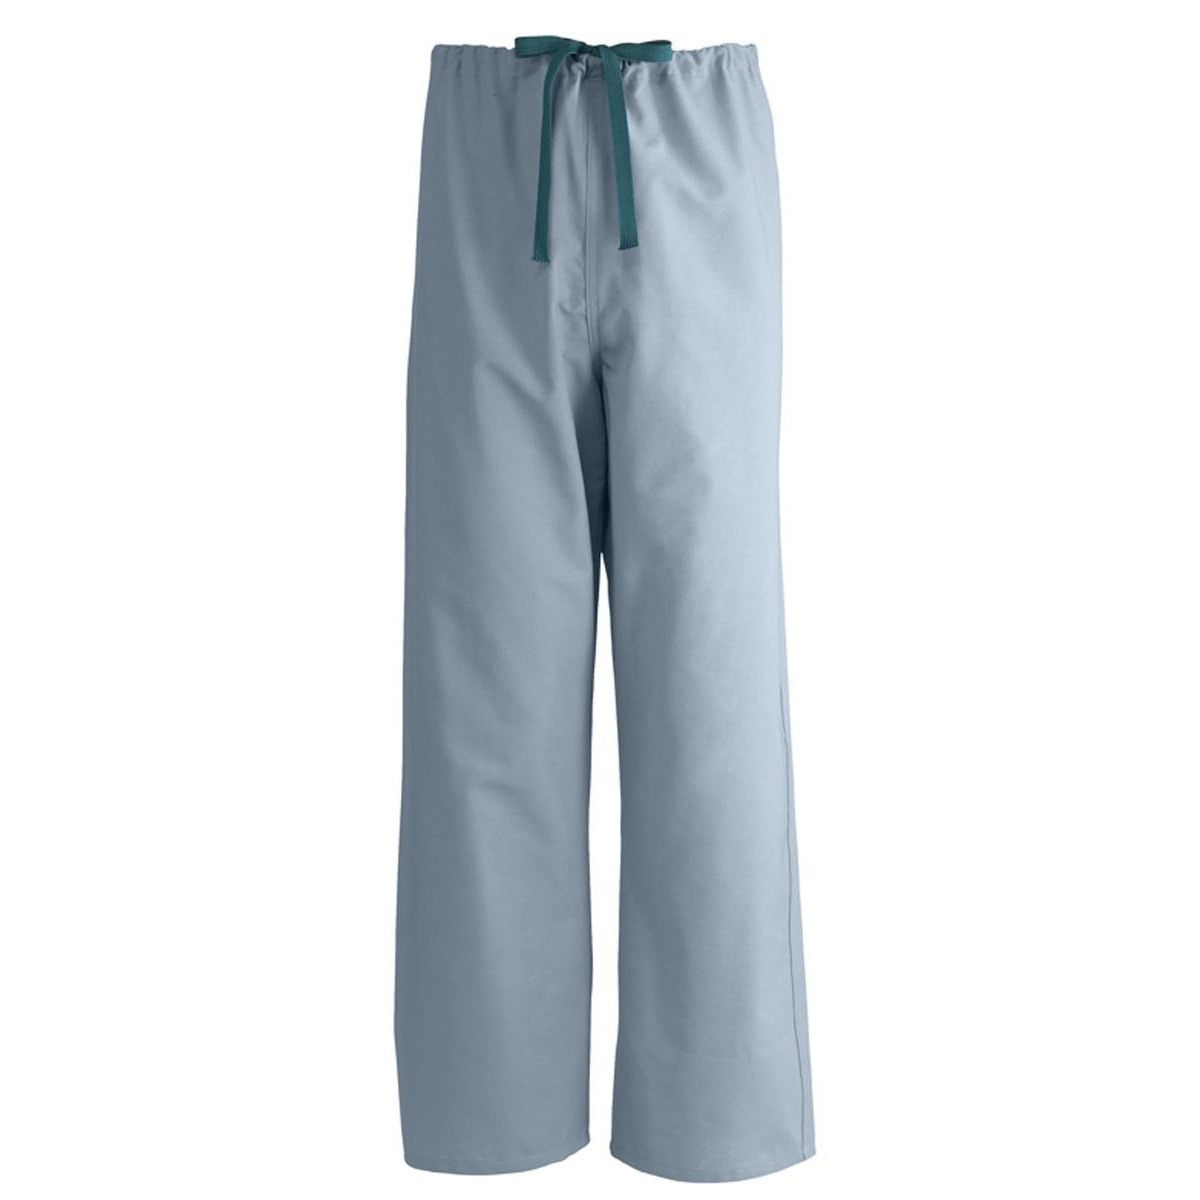 Can you confirm the color of these misty green scrubs, the EconoBlen Unisex Reversible Scrub Pants?